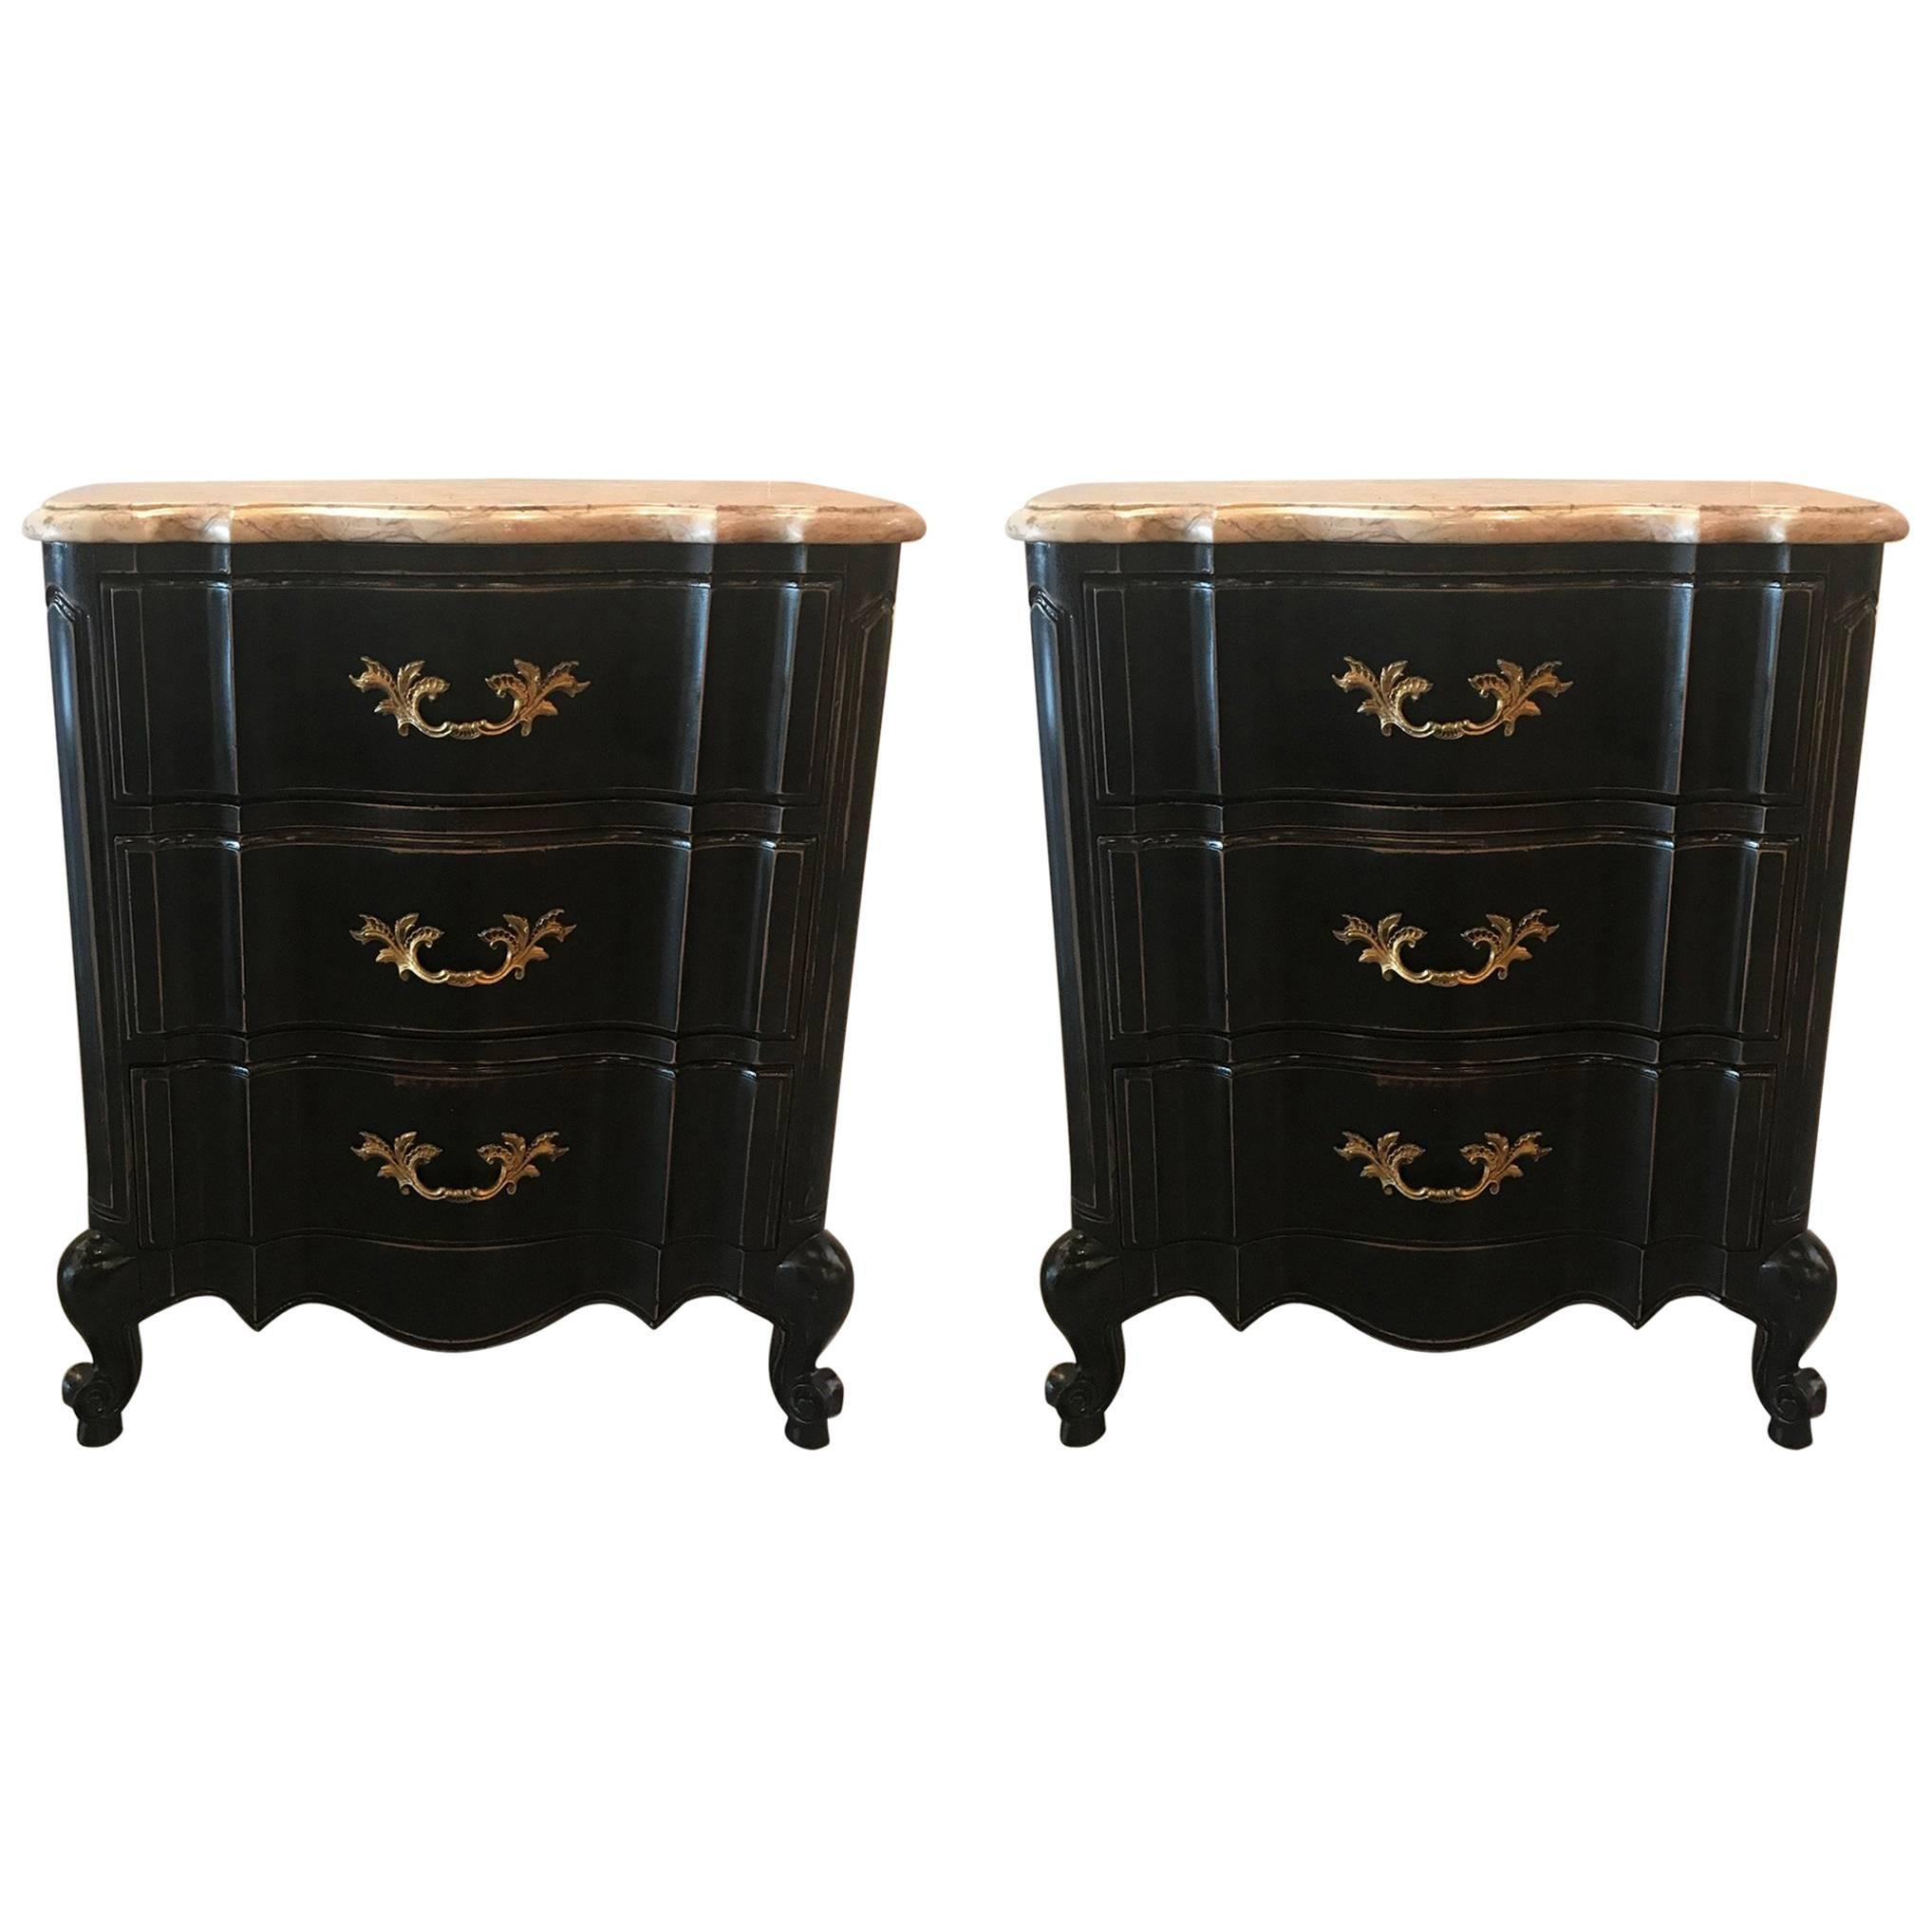 Pair of French Style Carved and Painted Walnut Side Commodes